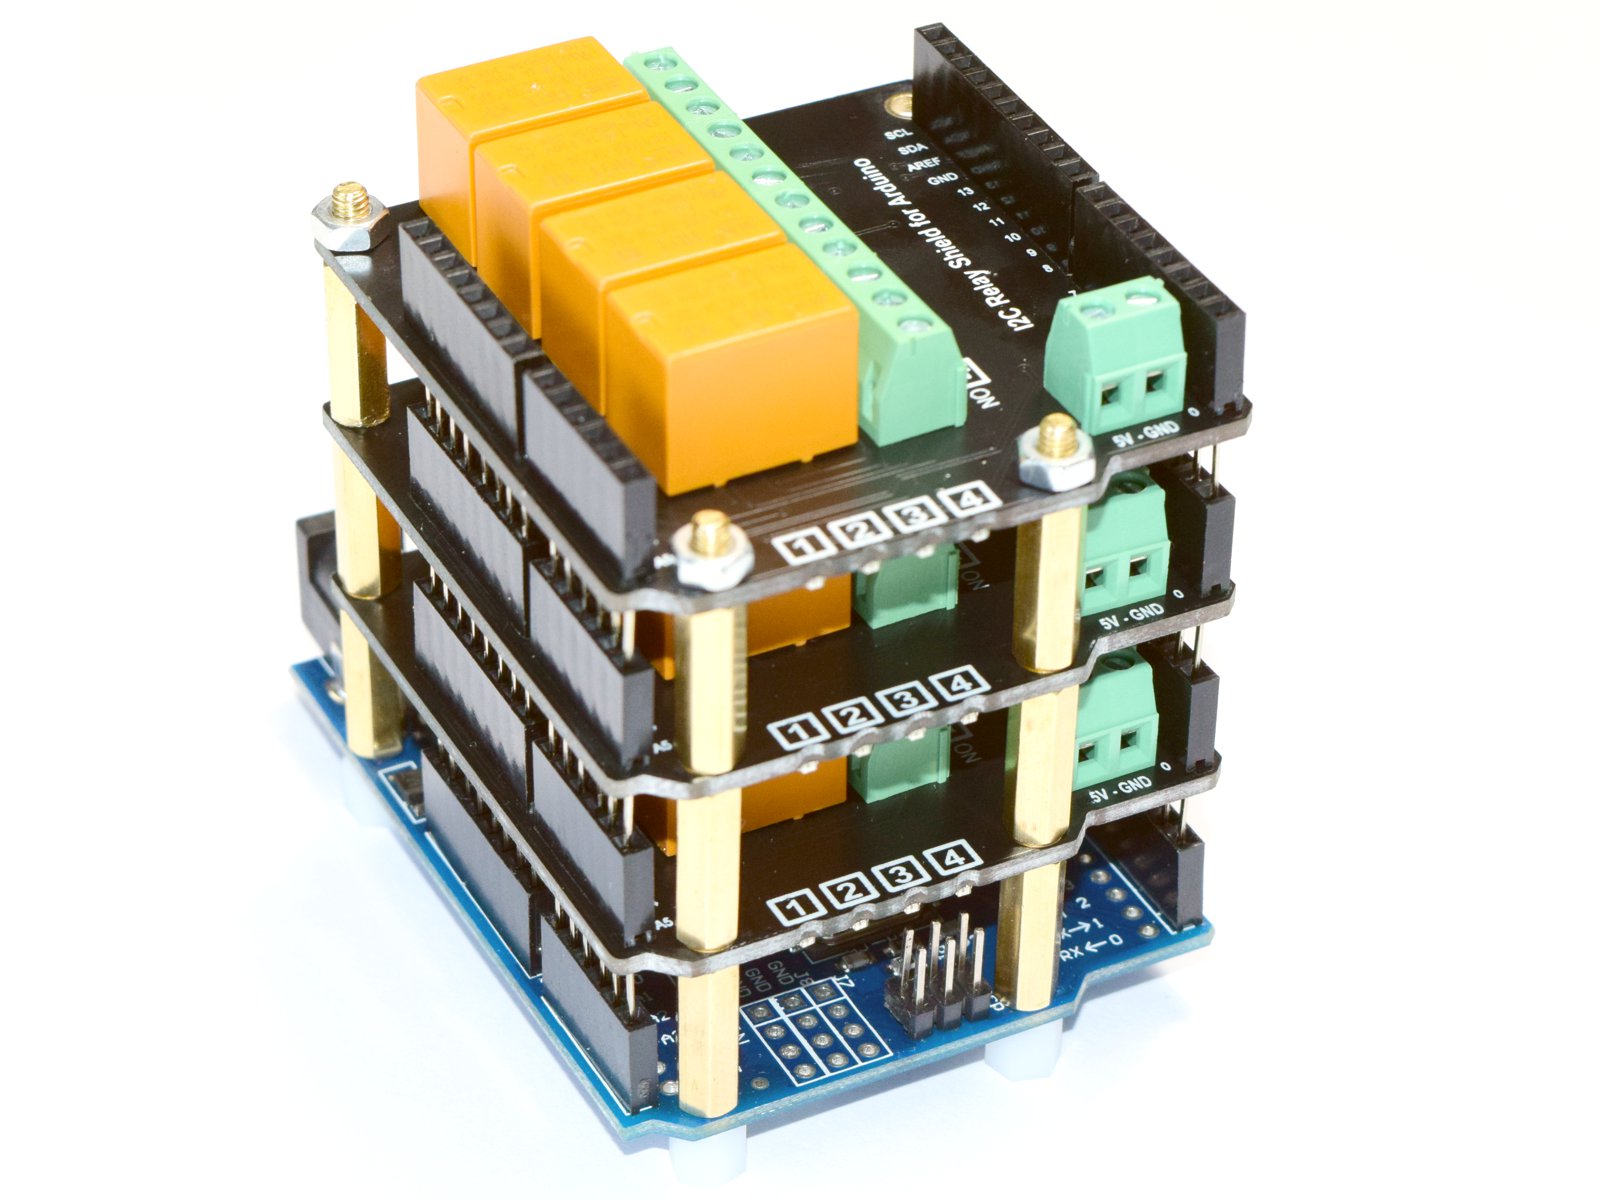 CANADUINO 4-Channel Stackable I2C Relay Shield for Arduino – Assembled 7